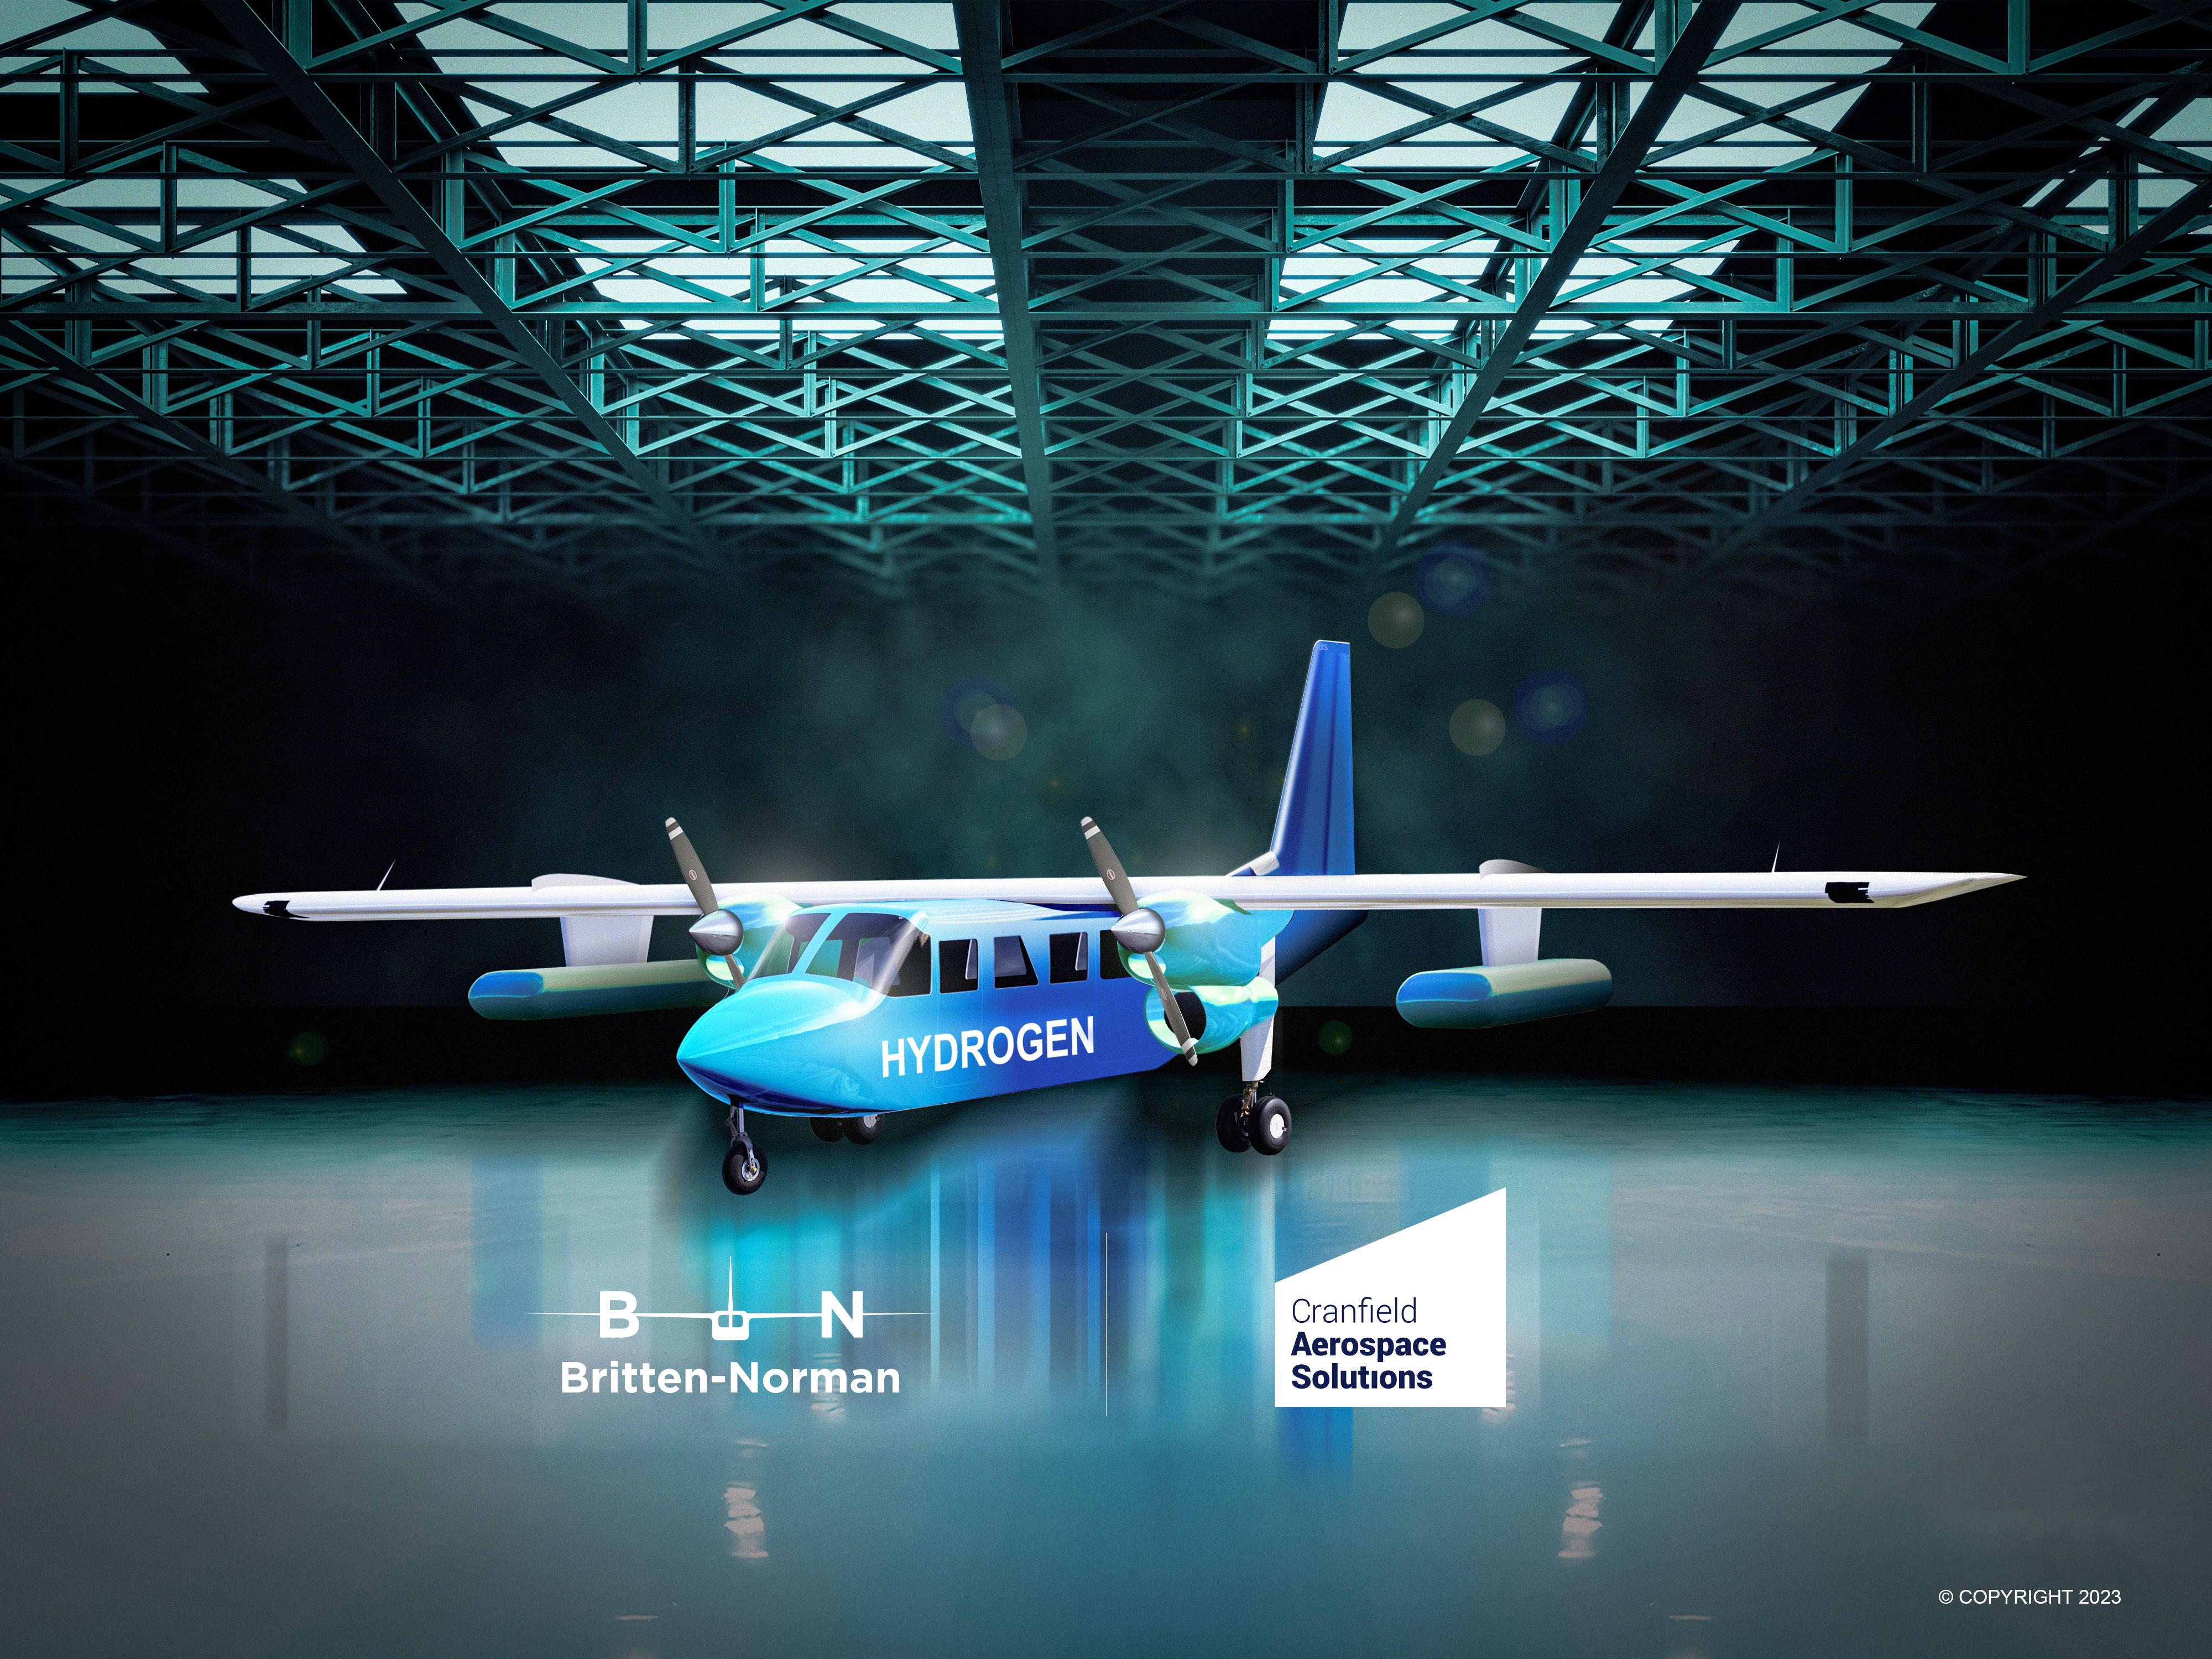 Britten-Norman and Cranfield Aerospace merger for zero-emissions airplane